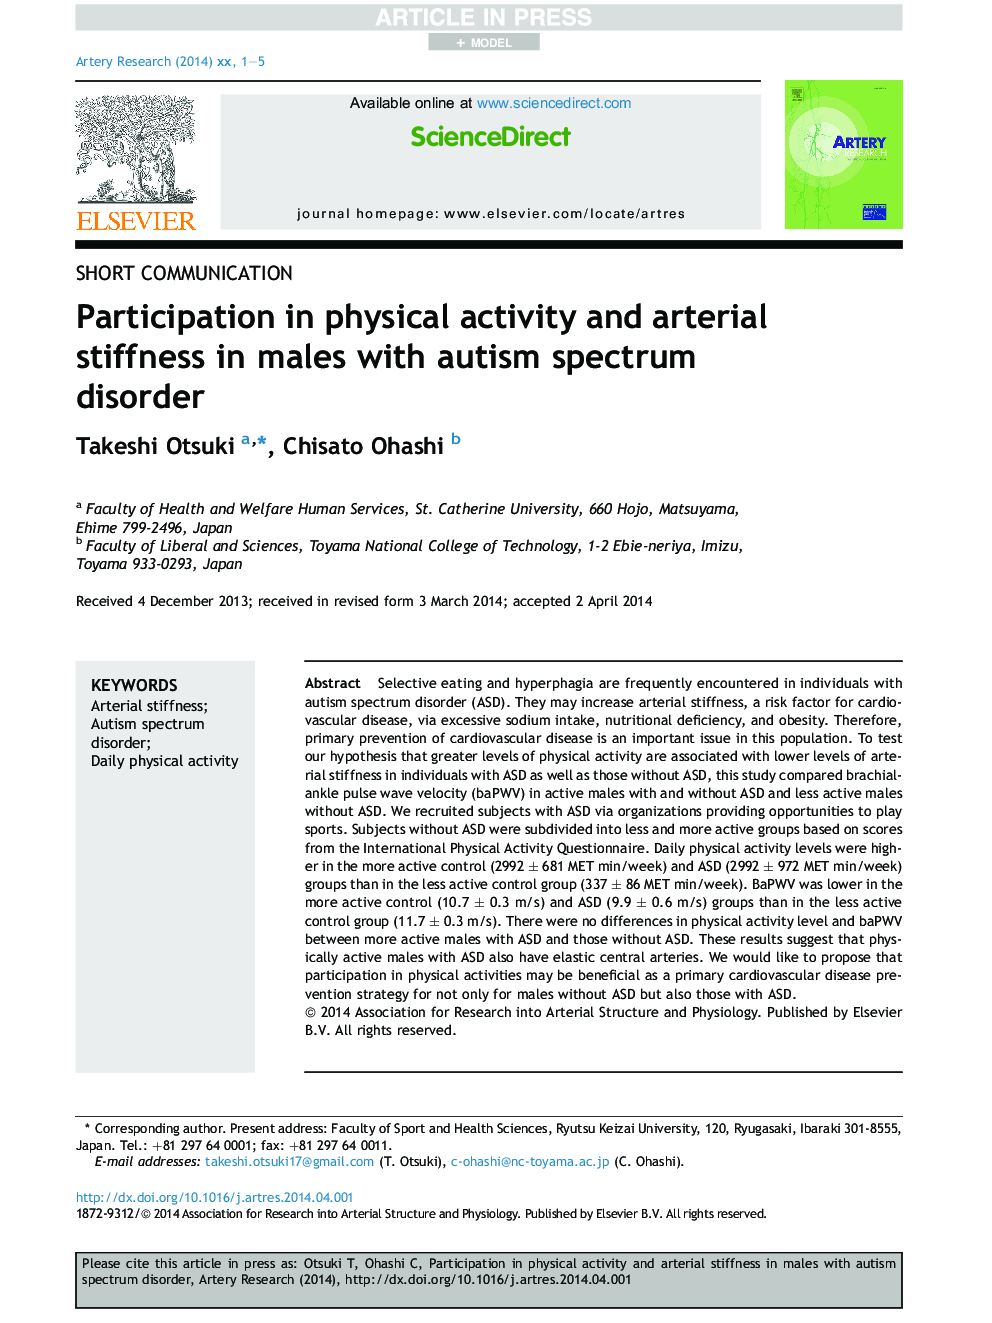 Participation in physical activity and arterial stiffness in males with autism spectrum disorder